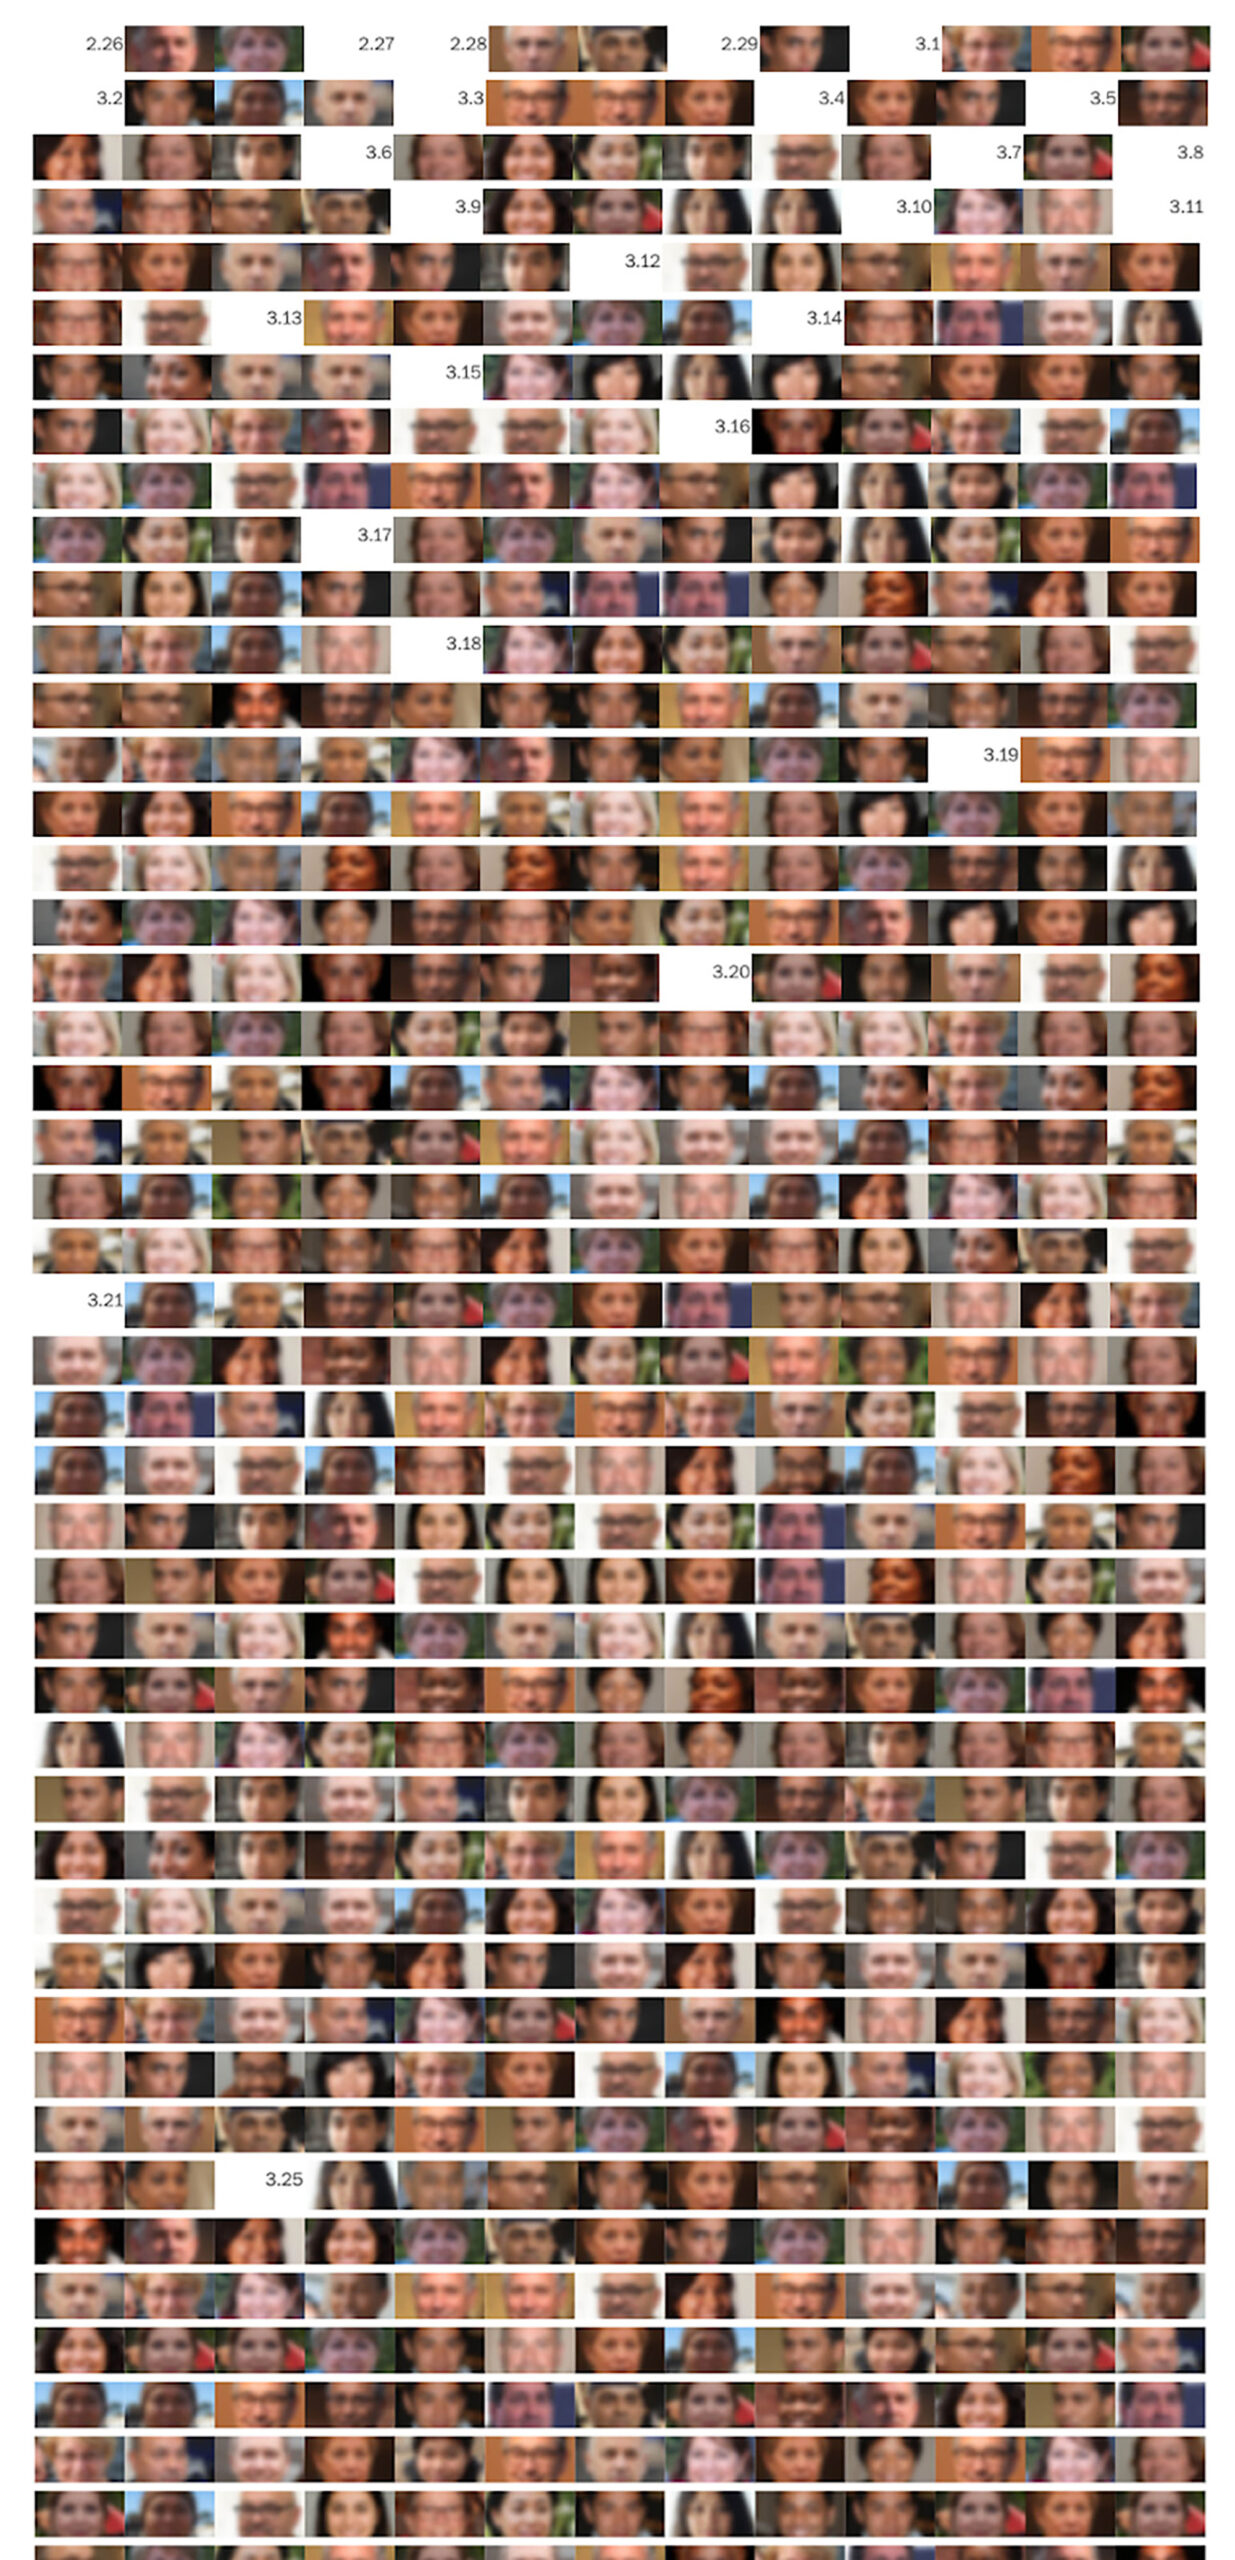 Still image from The Washington Post's interactive graphic, displaying blurred versions of machine-generated faces, representing the Americans lost to Covid-19 (based on their demographics)